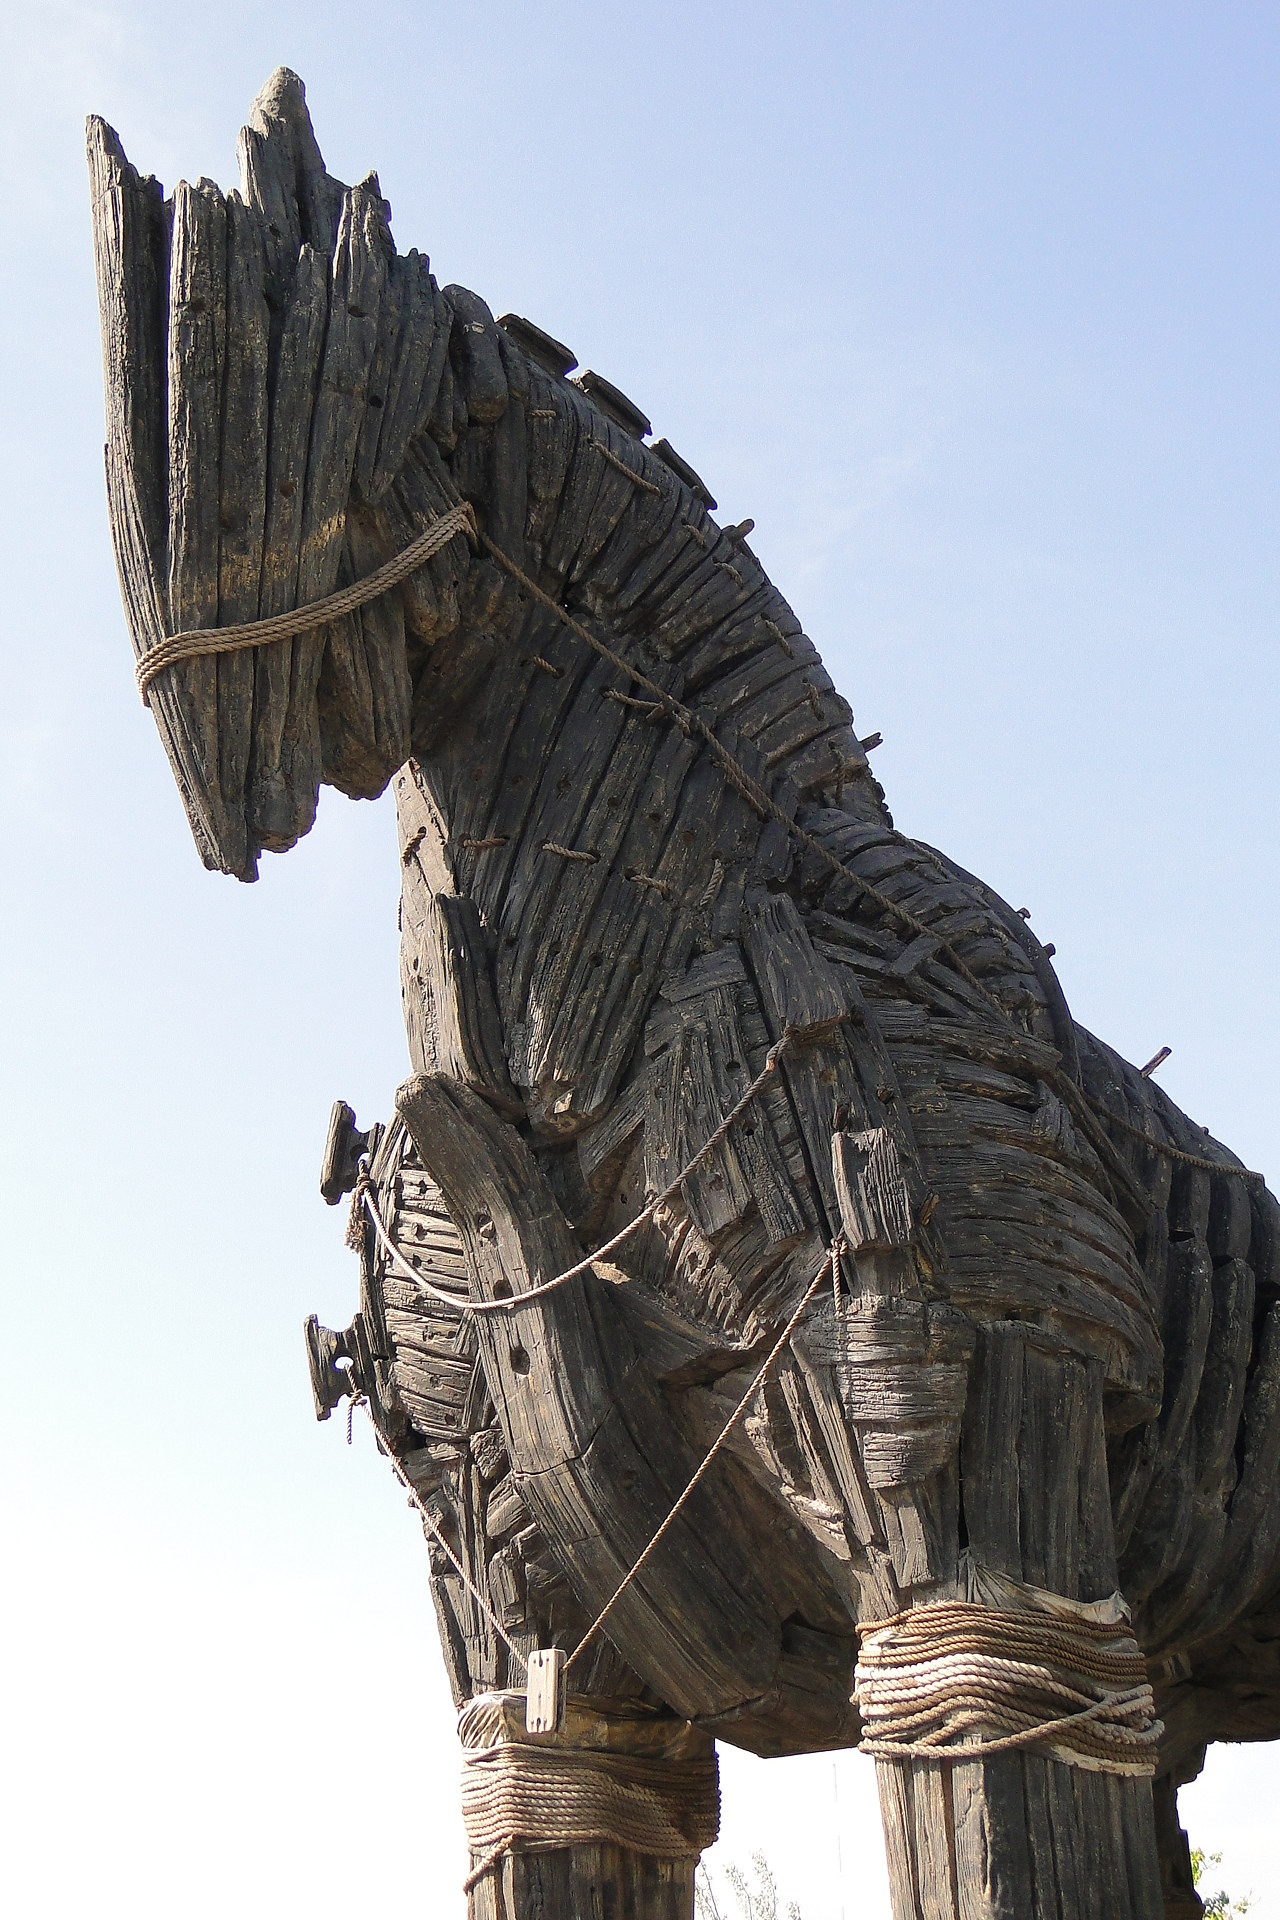 Giant wooden replica of a trojan horse. 